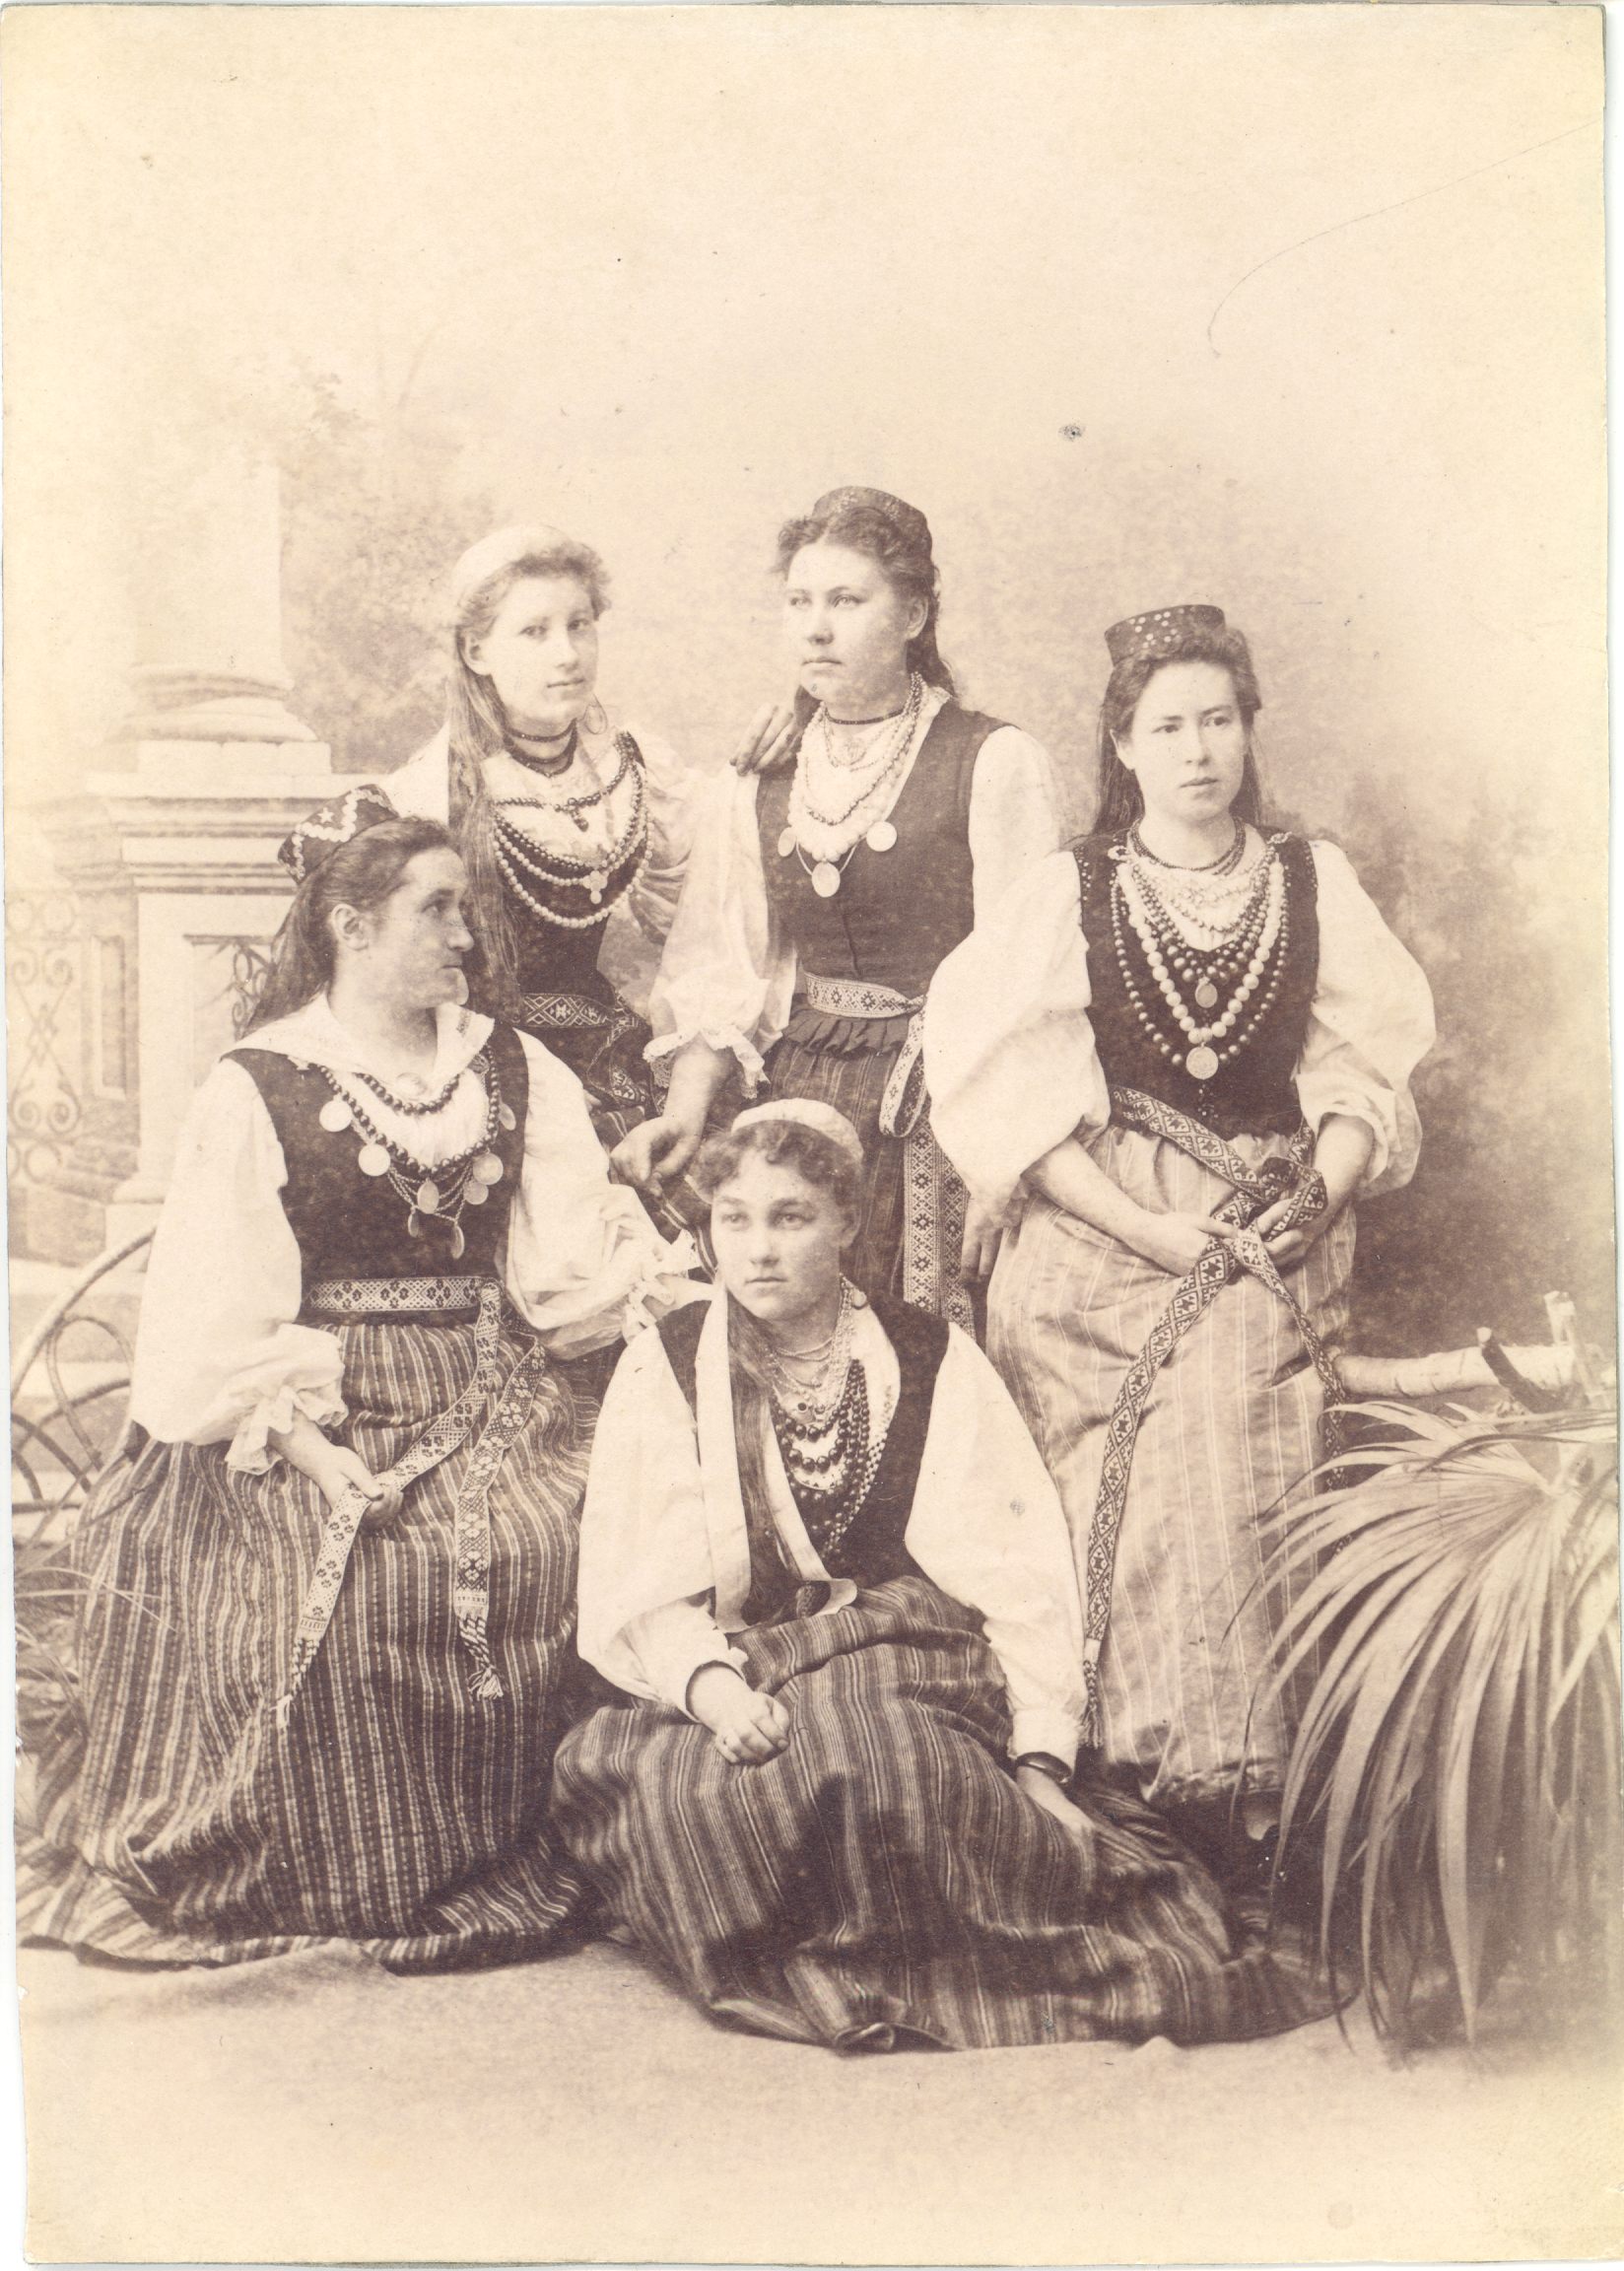 Härma, Miina group picture on the left with a. Jüris and a. Schulzeuberg and t.